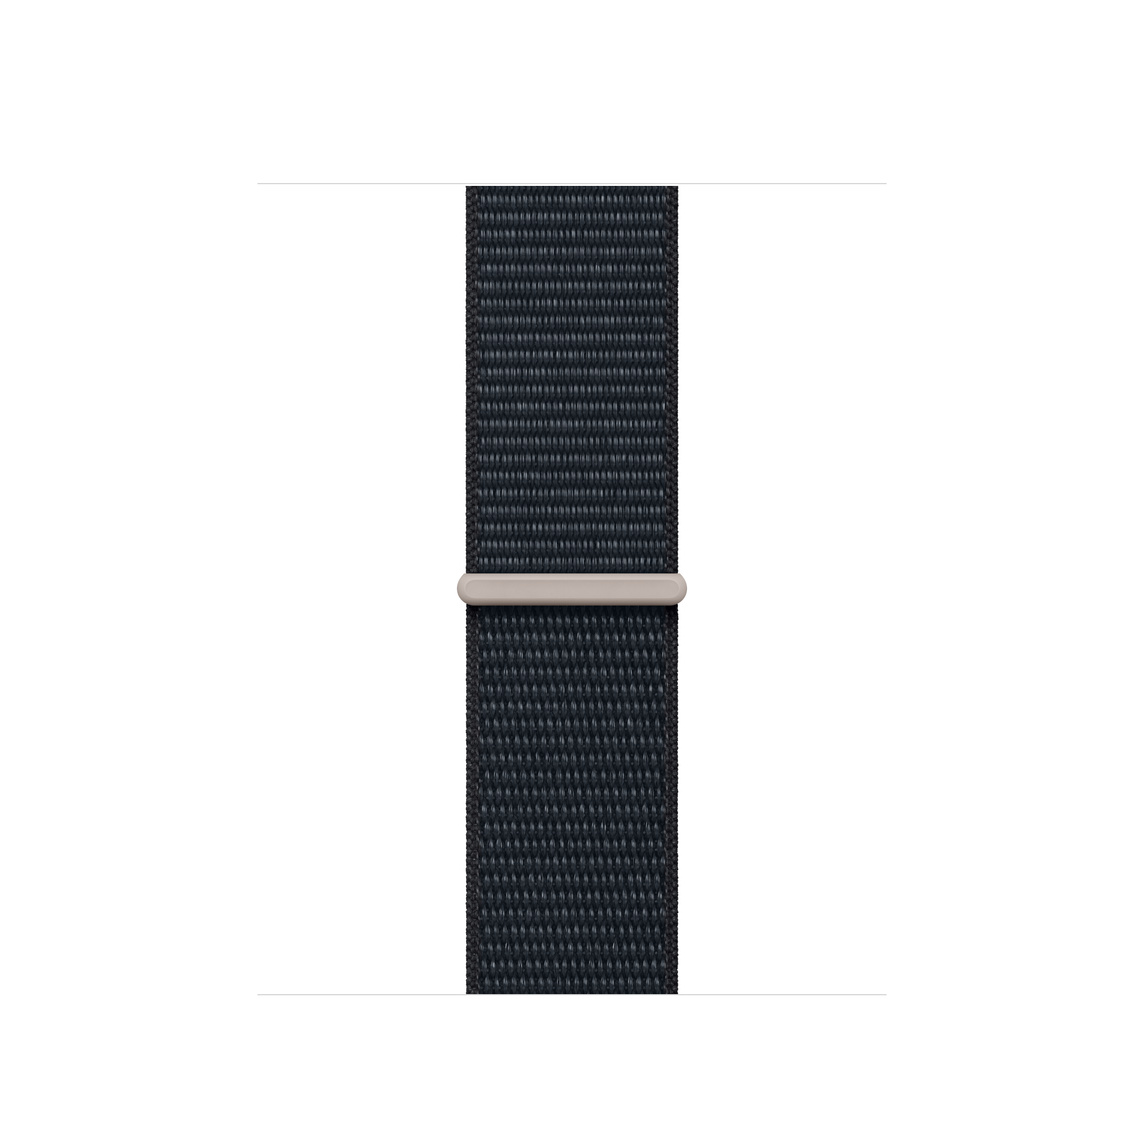 Midnight Sport Loop strap, dark blue woven nylon with light blue and brown stripes, hook-and-loop fastener